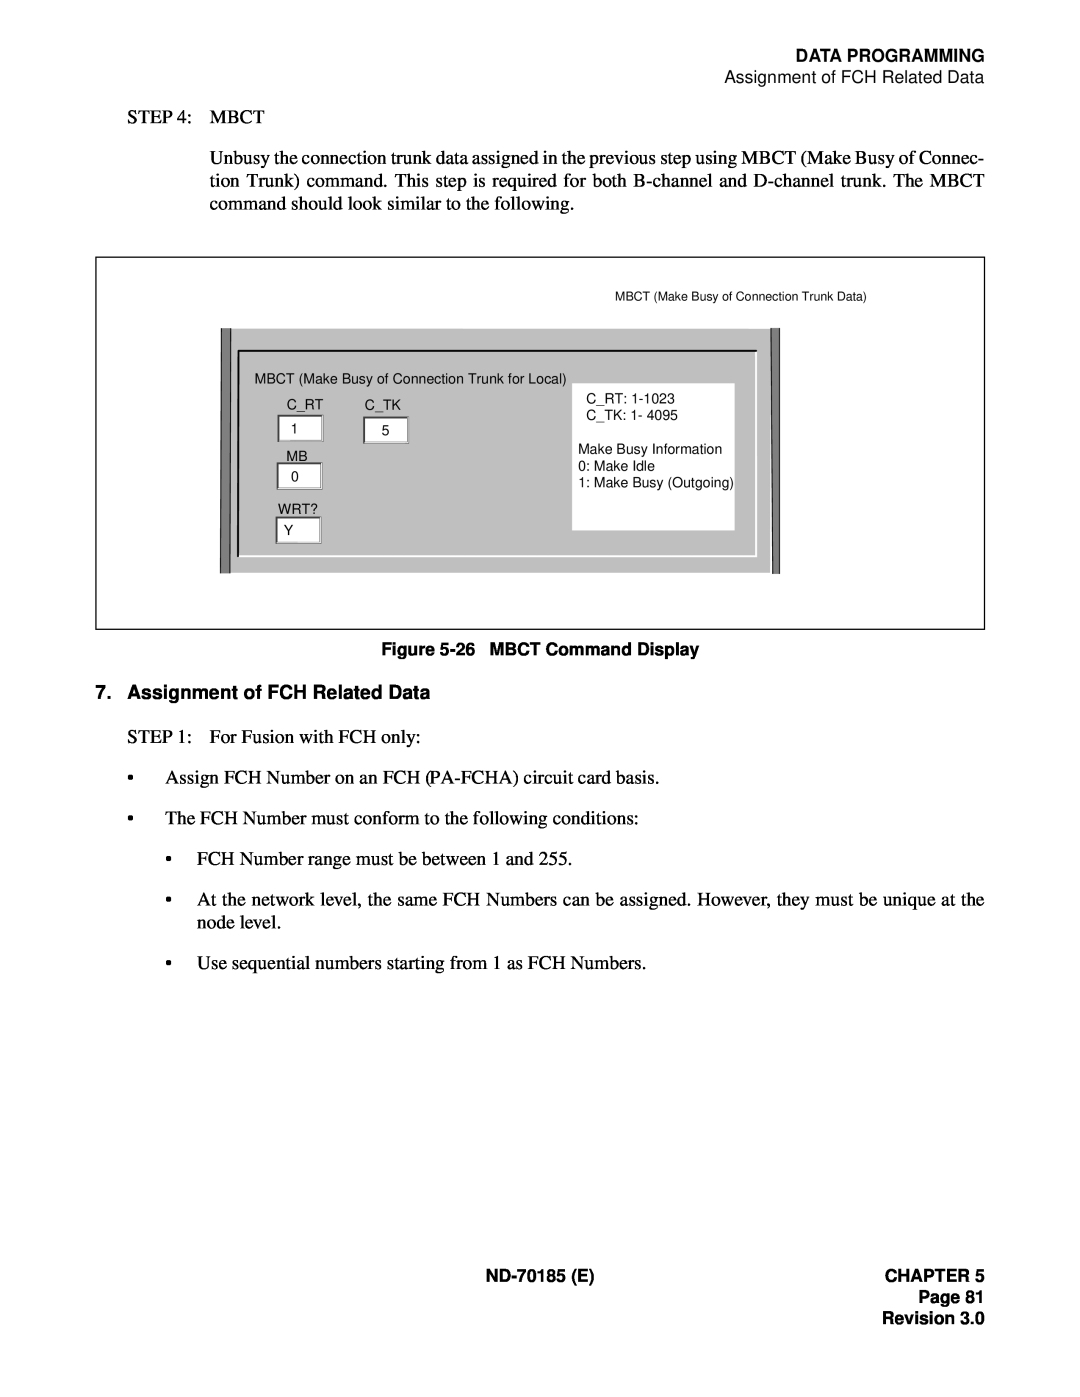 NEC NEAX2400 system manual Assignment of FCH Related Data 